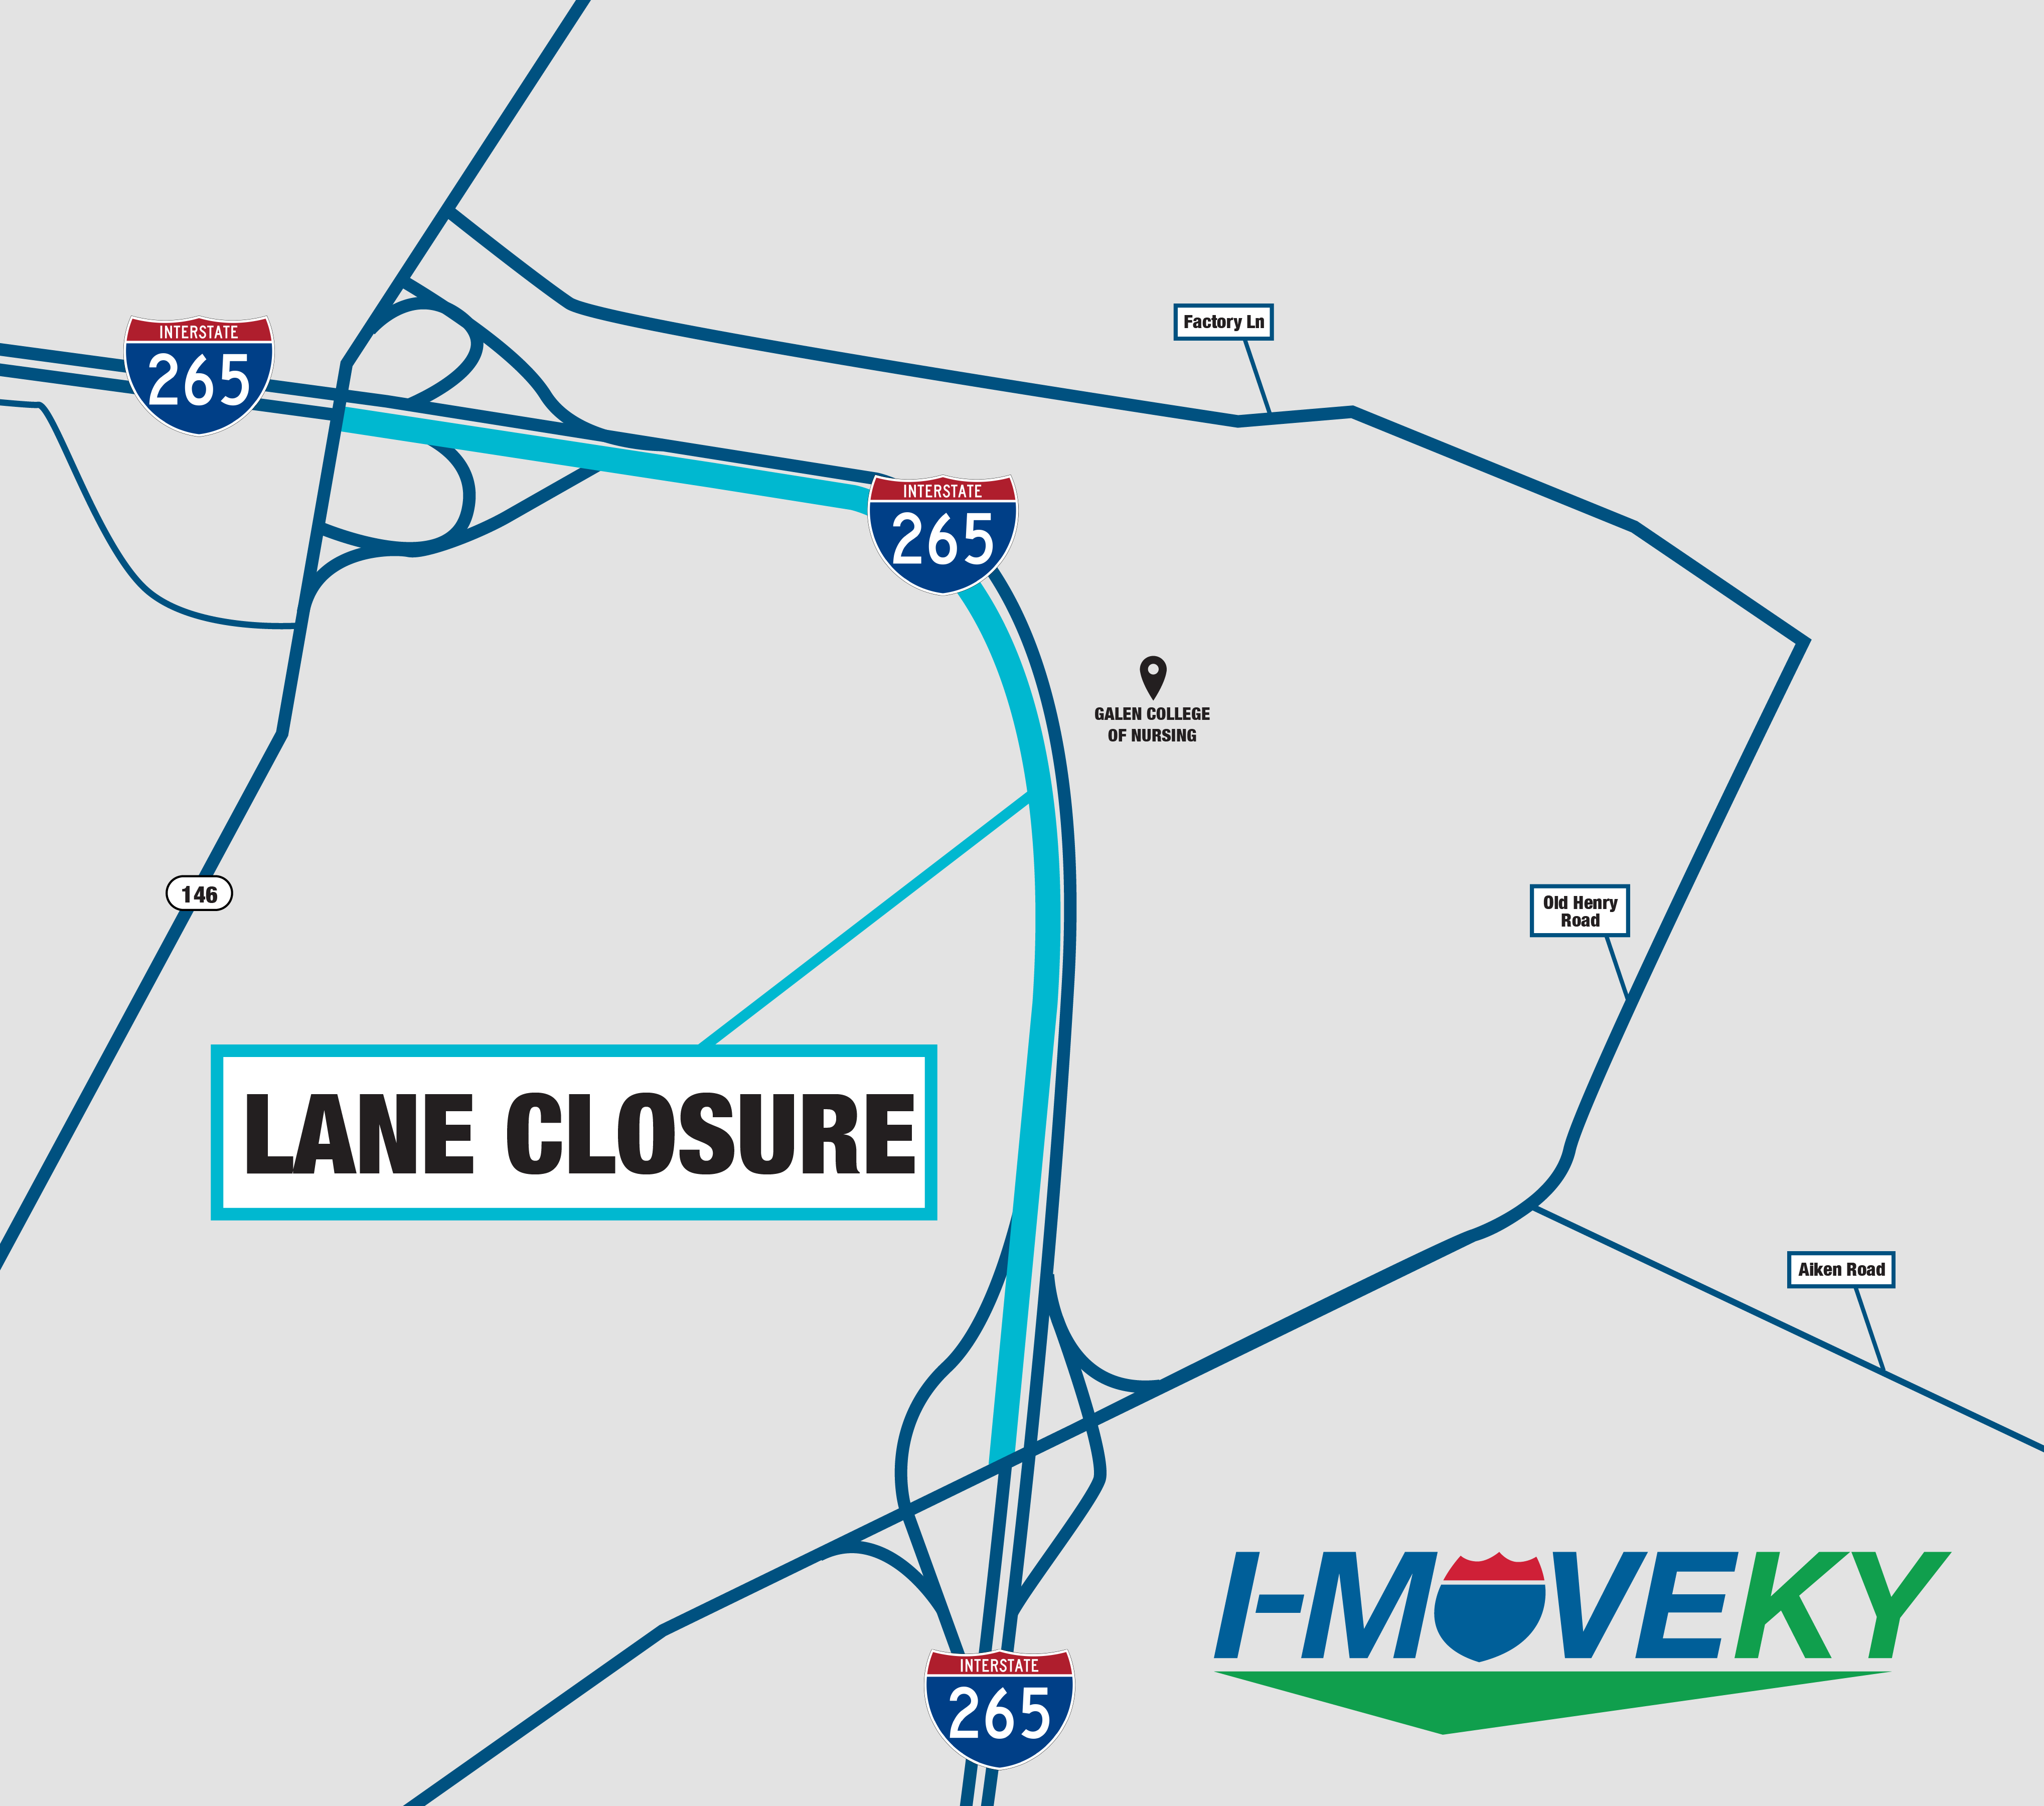 A gray map showing the lane closure on I-265 South in blue.